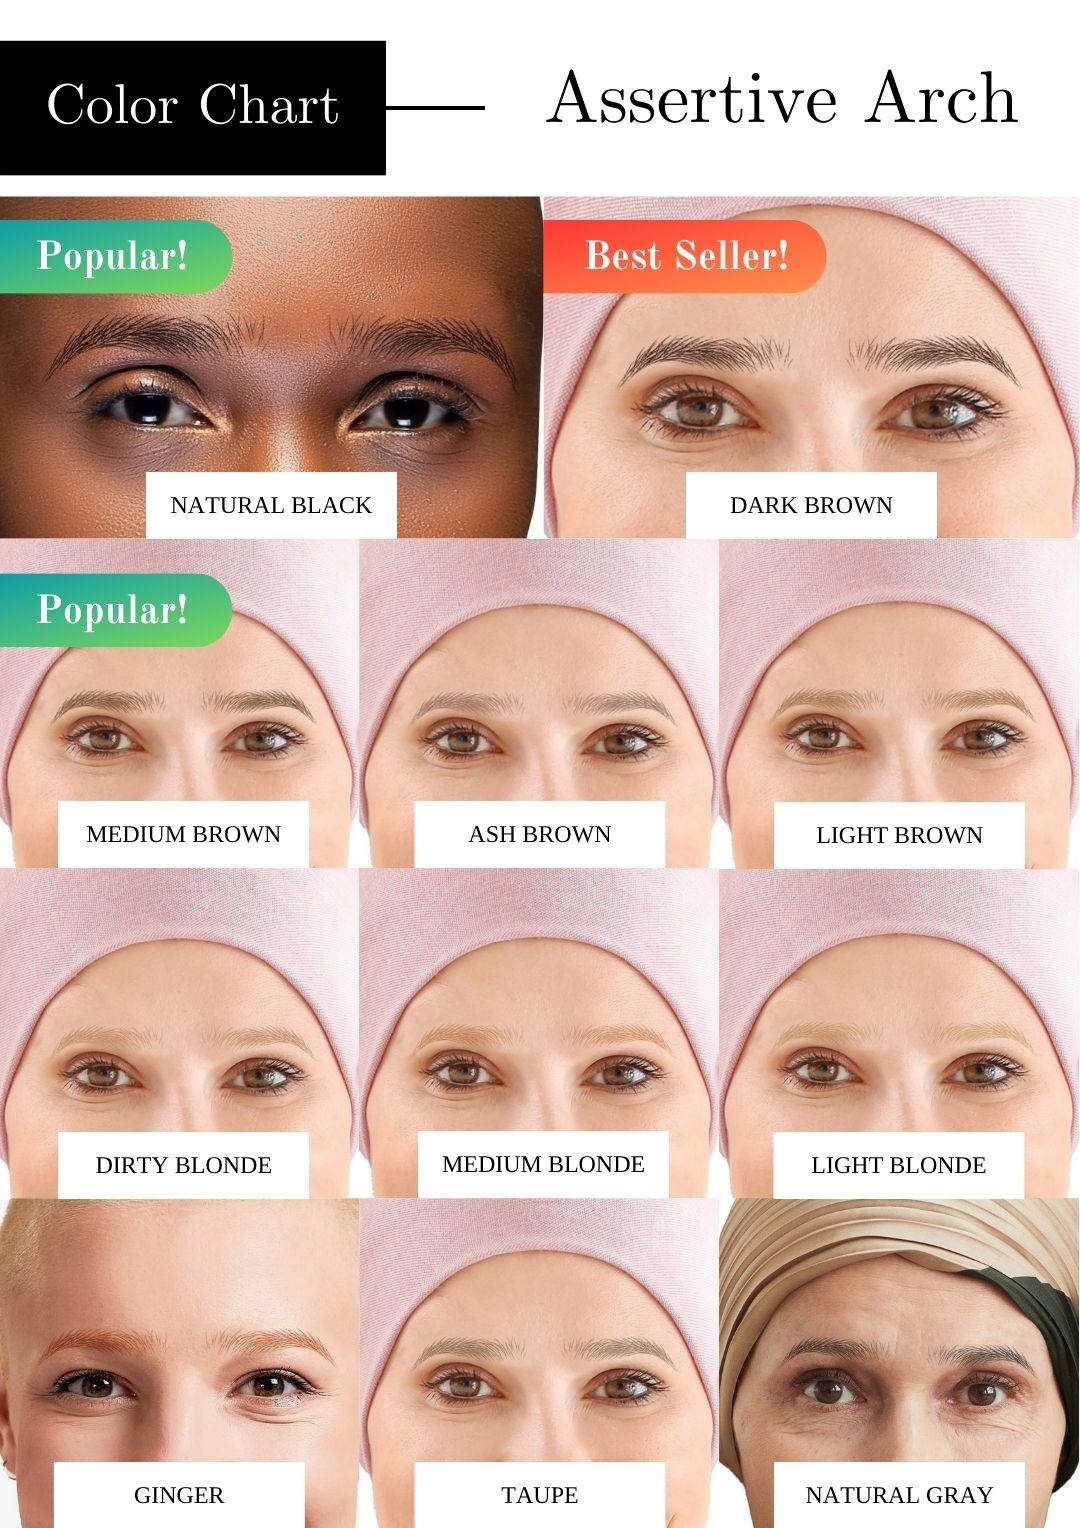 My Two Brows Color Chart - Assertive Arch Women